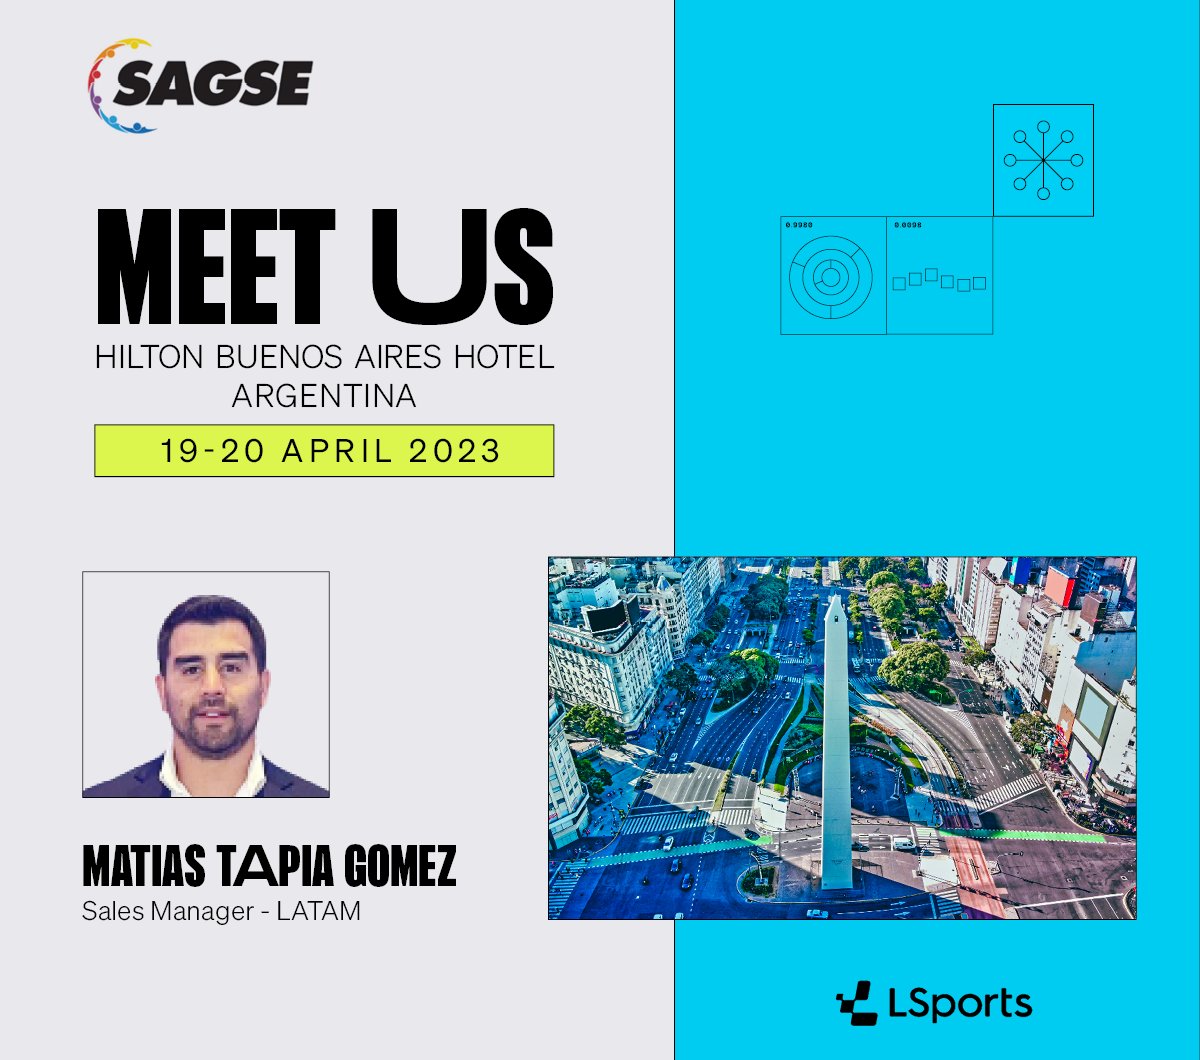 Hi there, sportsbook operators! Want to learn how to improve your business and gain an edge in the competitive sports betting market?
We'll be waiting for you at @sagselatam!
Schedule a meeting with our Sales Manager in LatAm >> matias.g@lsports.eu
#ESAHORA #WEARELATAM #SAGSE2023